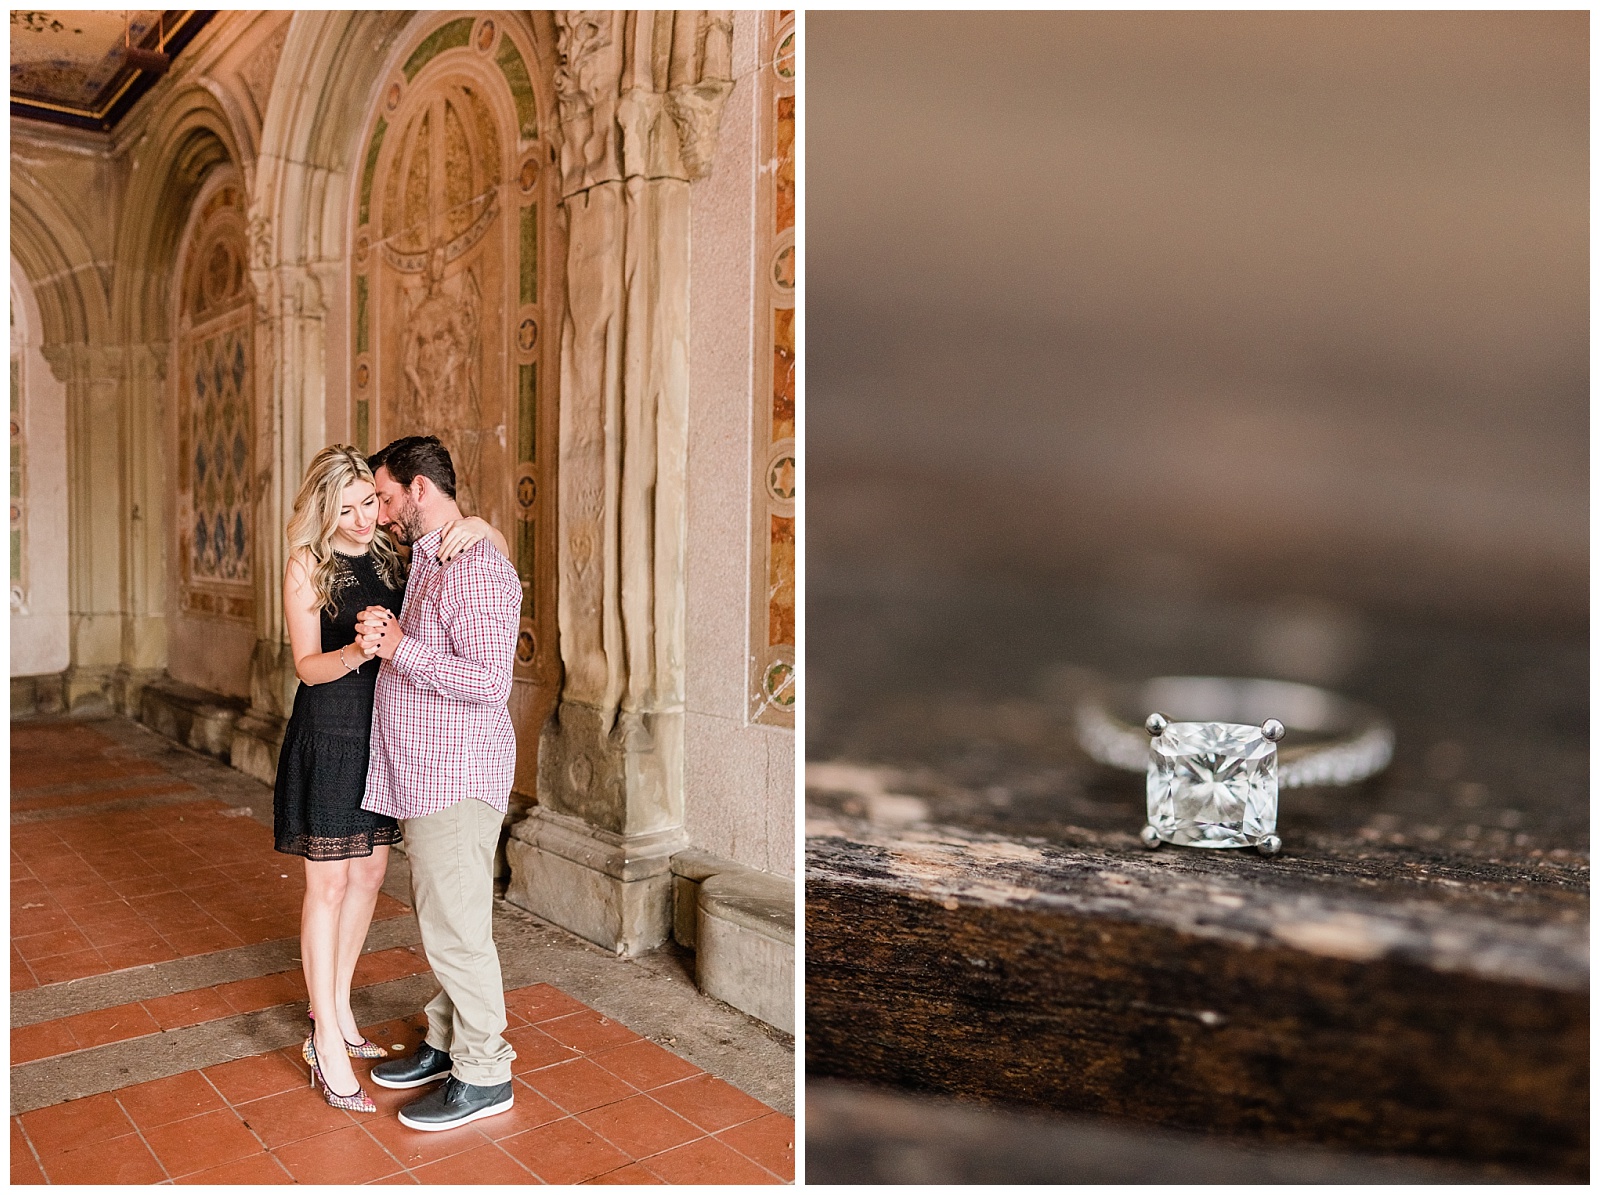 A couple dances together in Bethesda Terrace, paired with a diamond engagement ring.